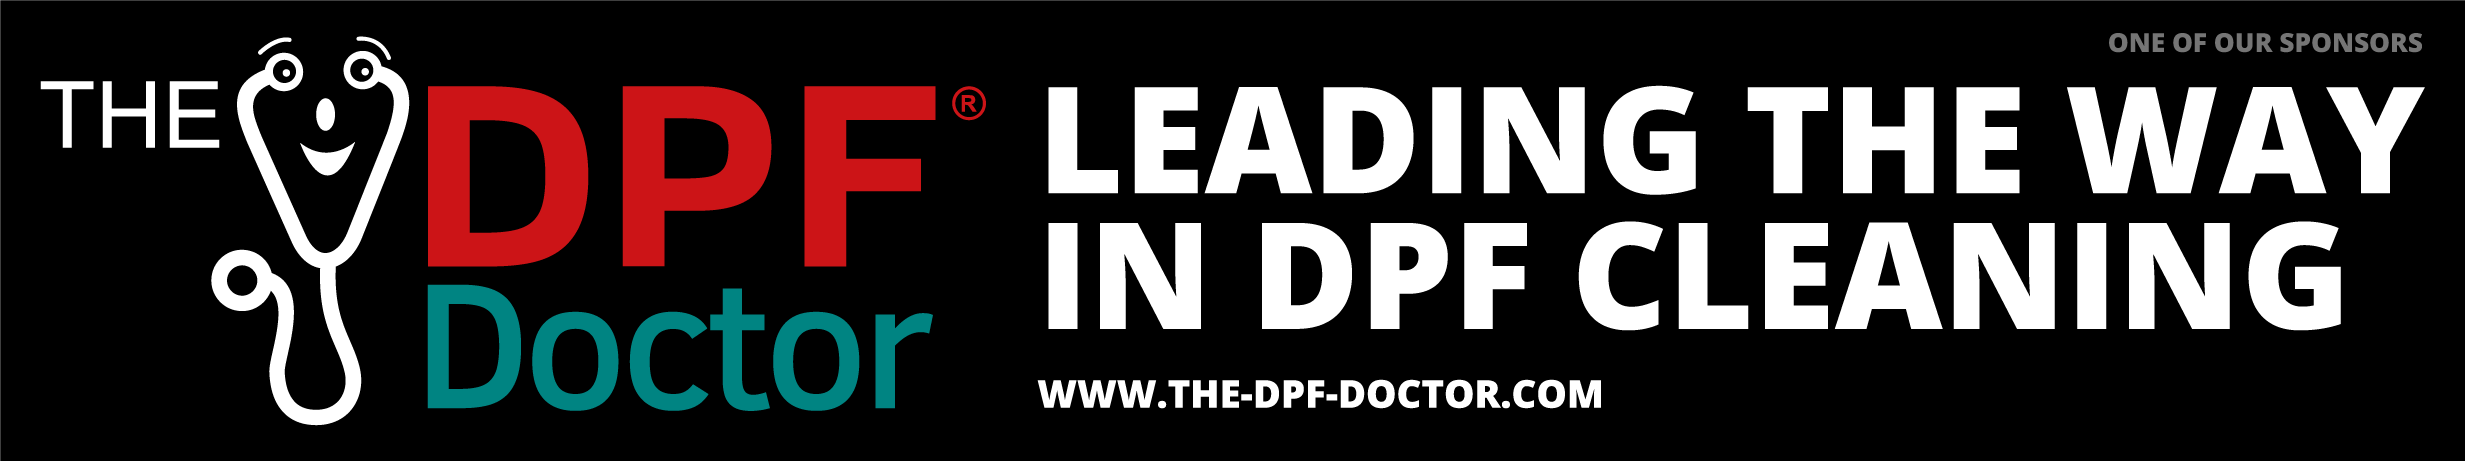 The DPF Doctor